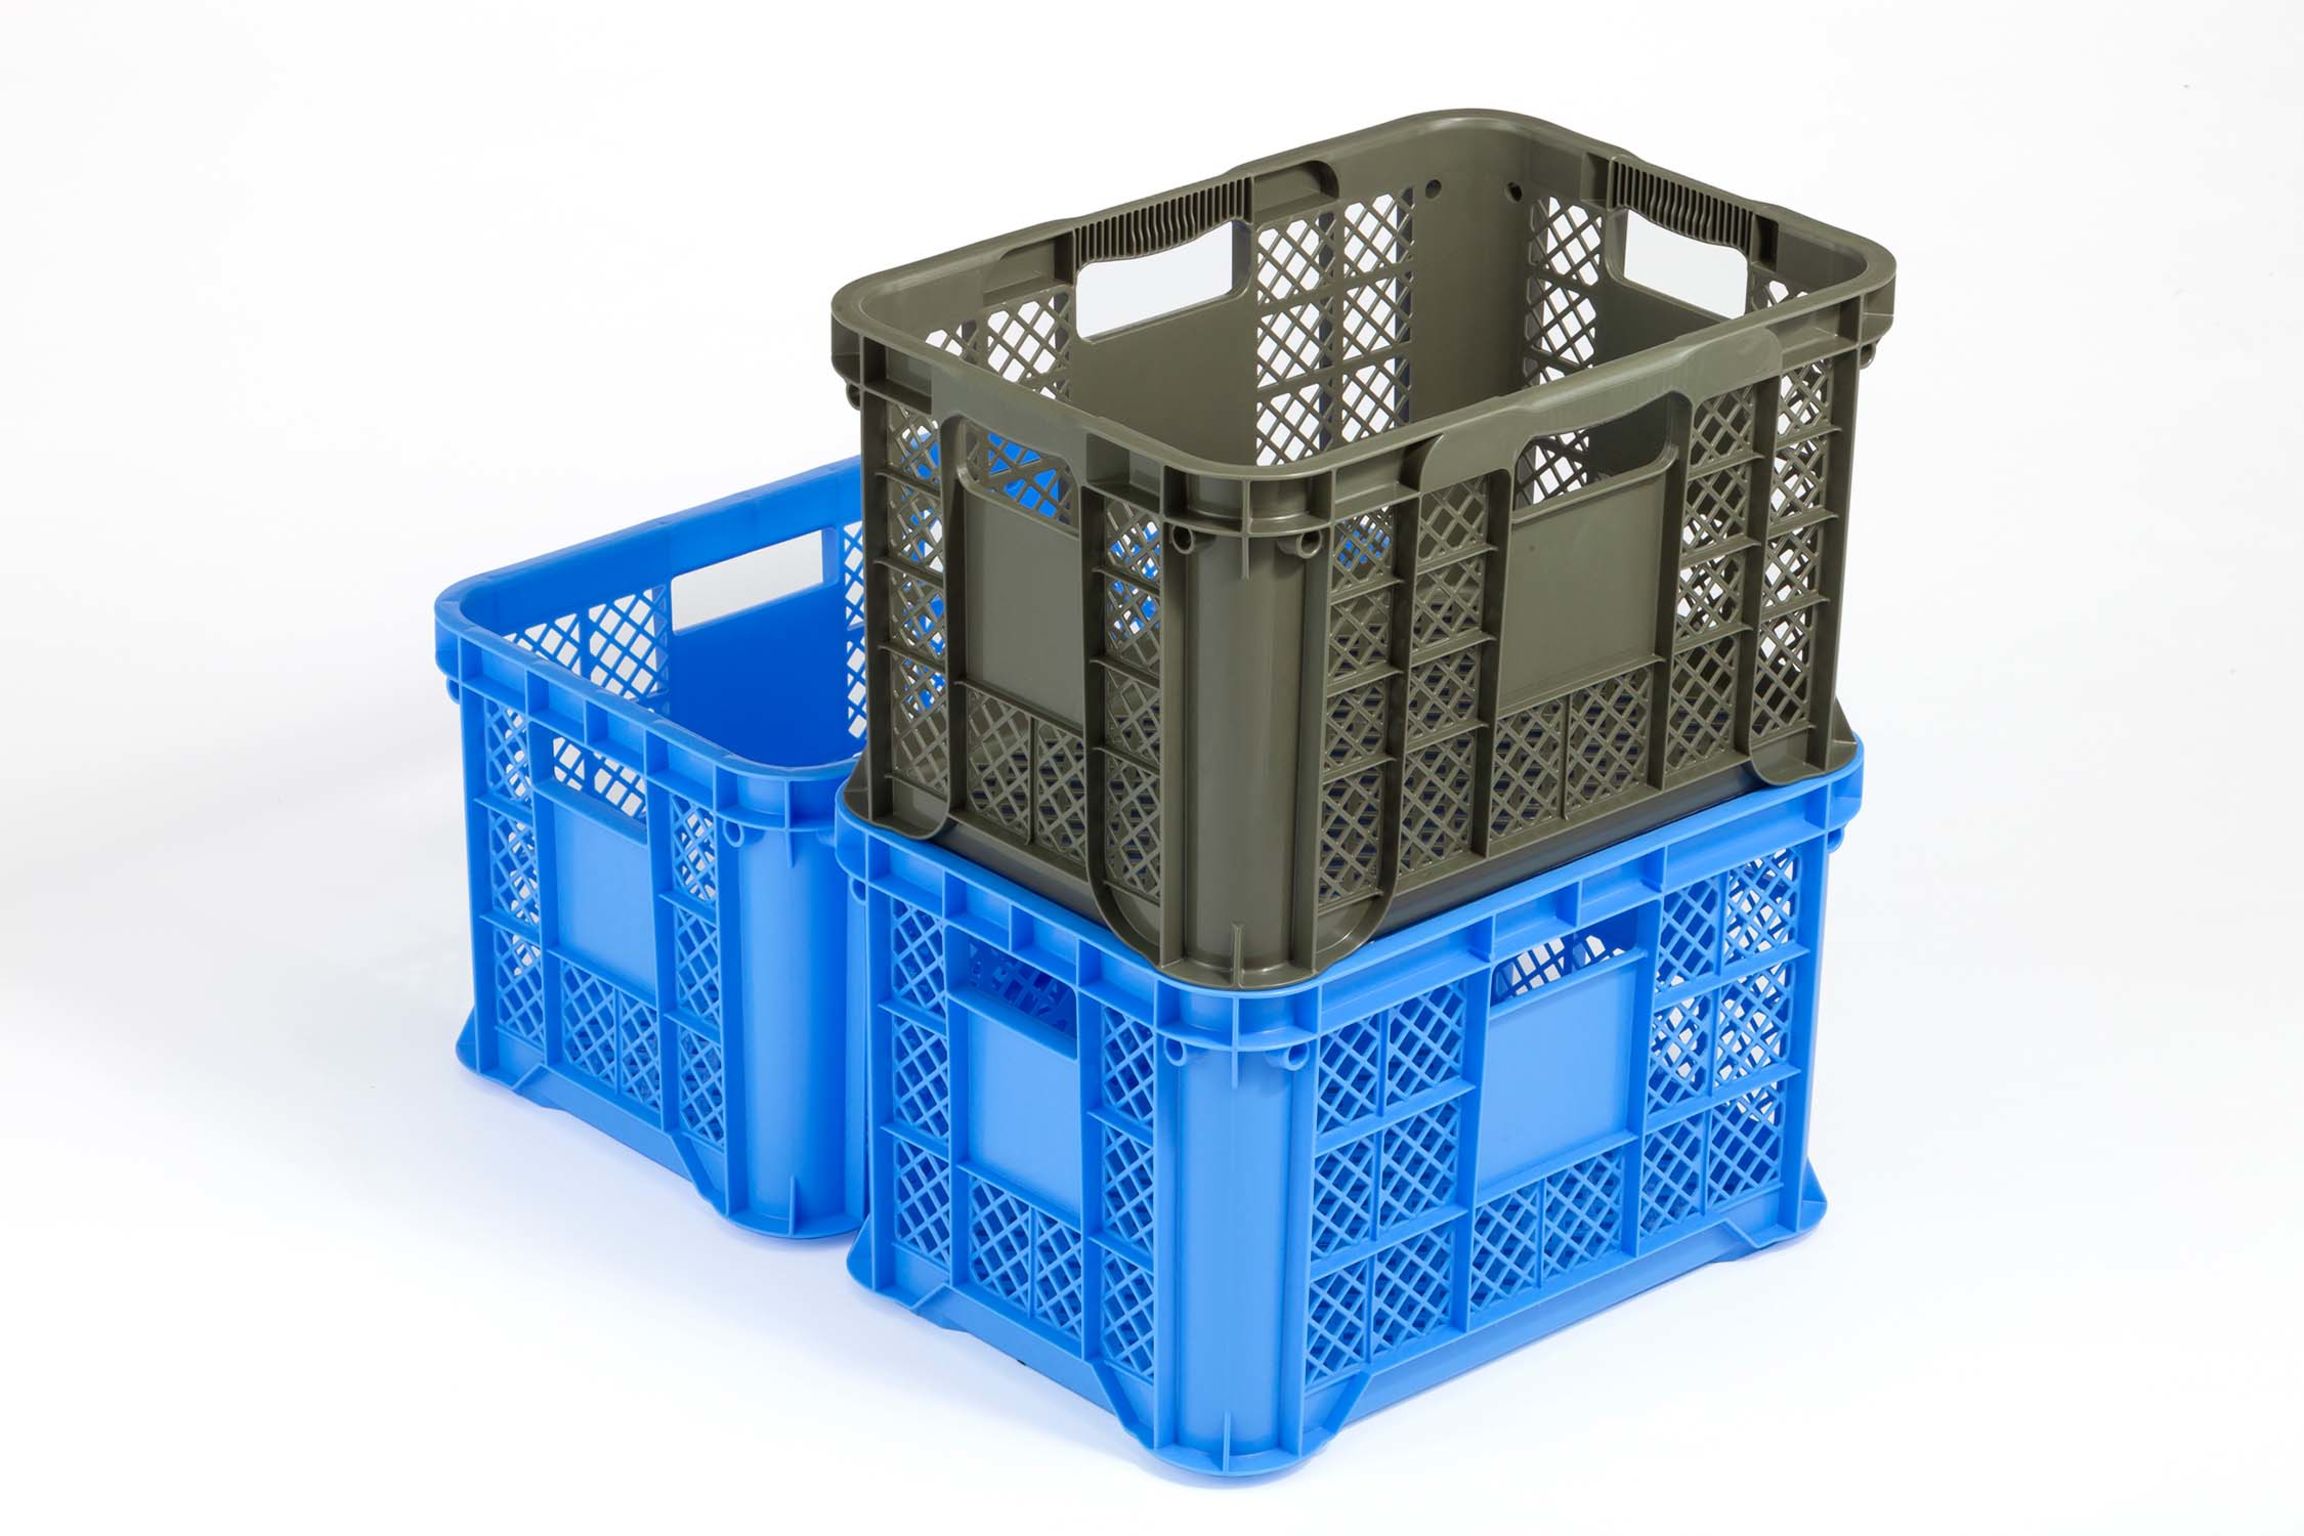 Containers with easy-to-grip handles